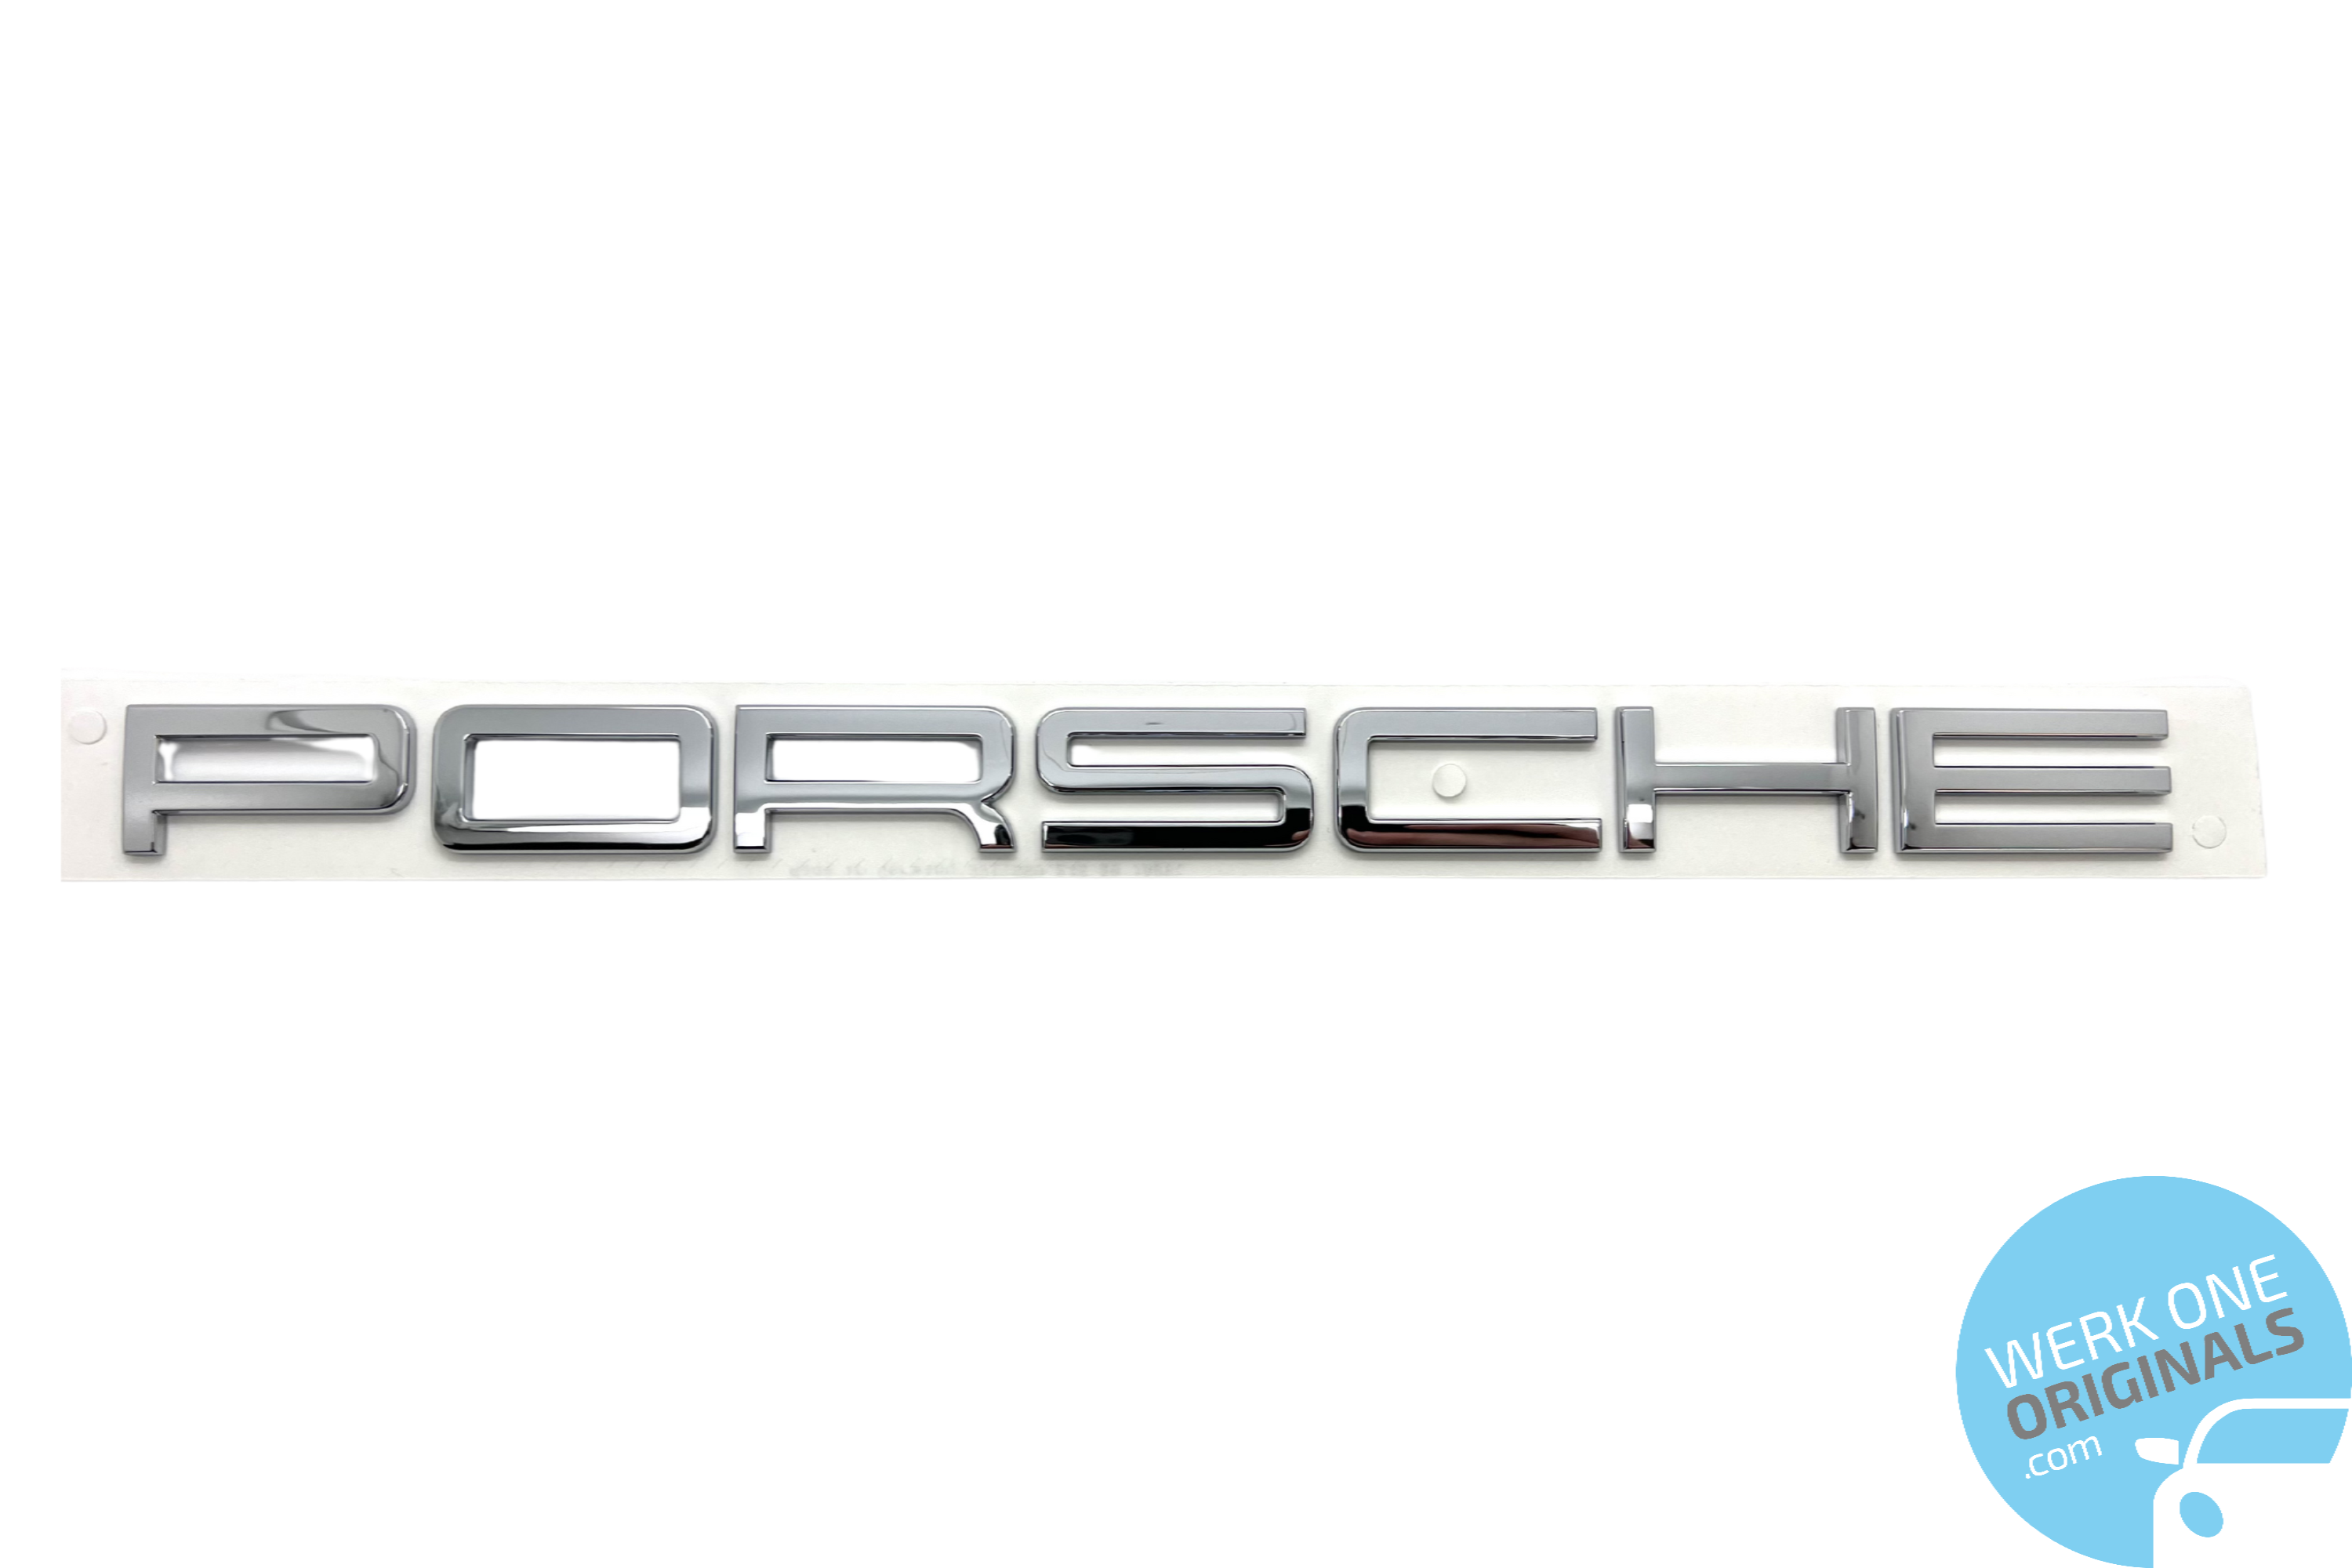 Official 'Porsche Cayenne S' Rear Badge Logo in Chrome Silver for Cayenne S Type 958 Models